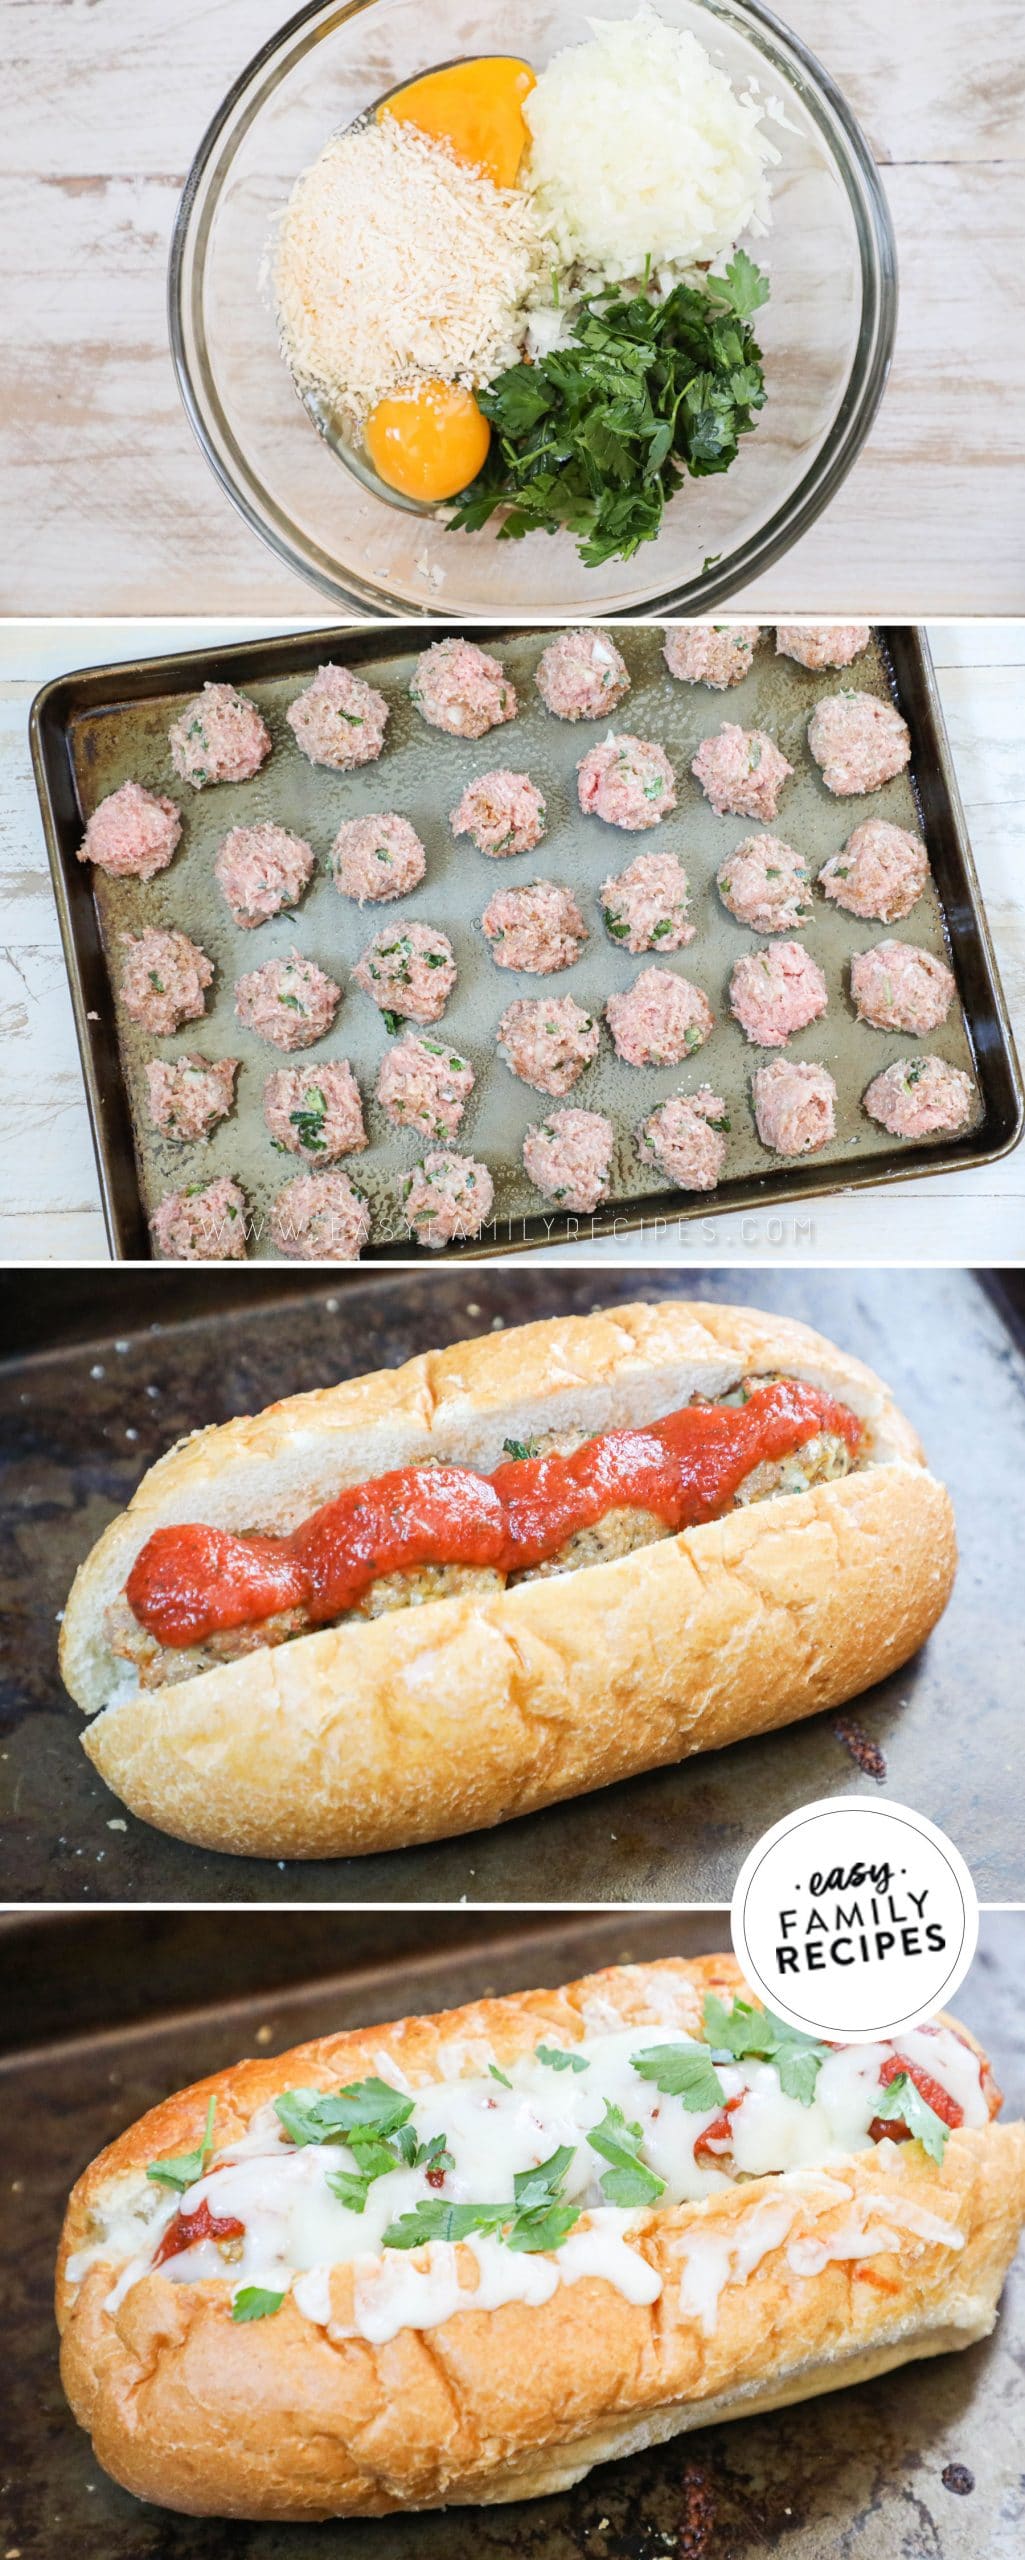 Process Photos for How to Make Italian Turkey Meatball Subs- 1. Mix up turkey Meatballs. 2. Bake Meatballs 3. Assemble meatball subs. 4. Bake turkey Meatball subs with cheese and marinara